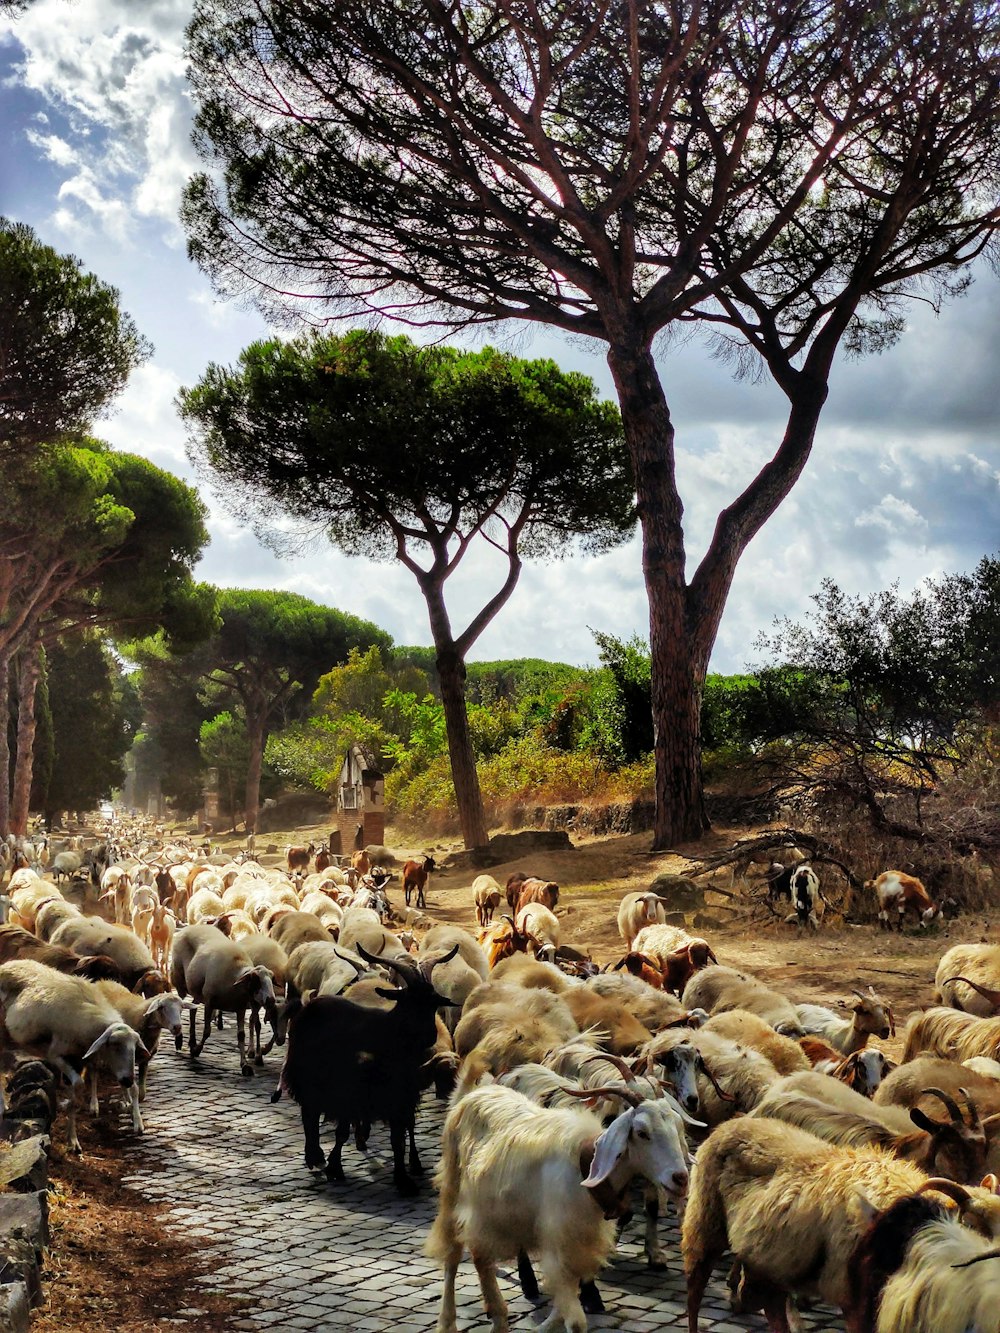 a herd of sheep walking on a dirt road